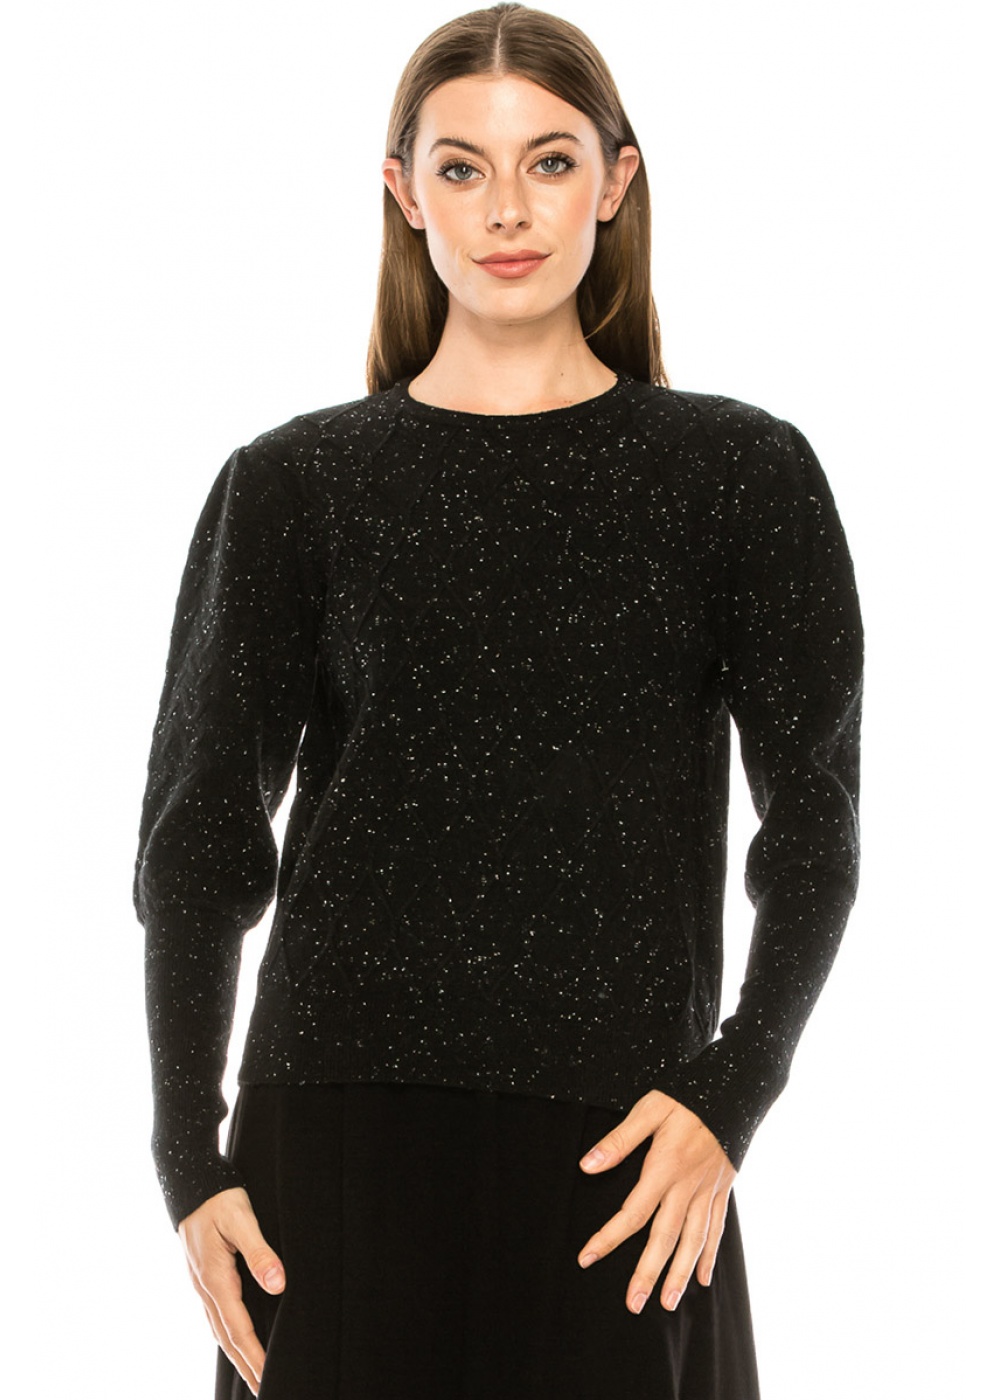 Leg-of-mutton sleeve shiny sweater in black